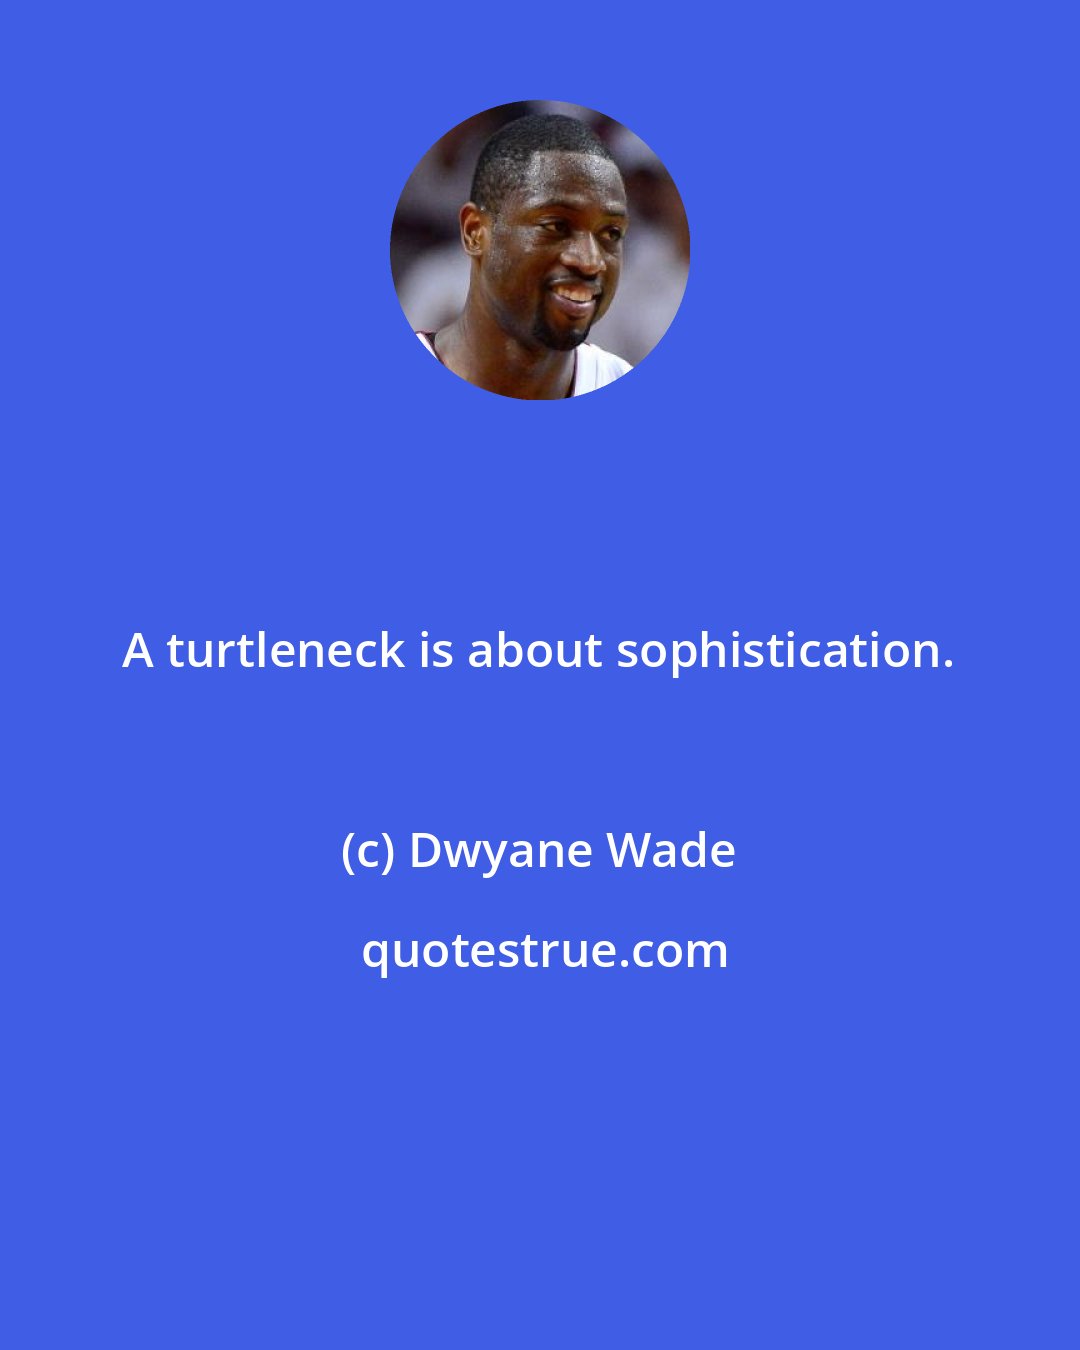 Dwyane Wade: A turtleneck is about sophistication.